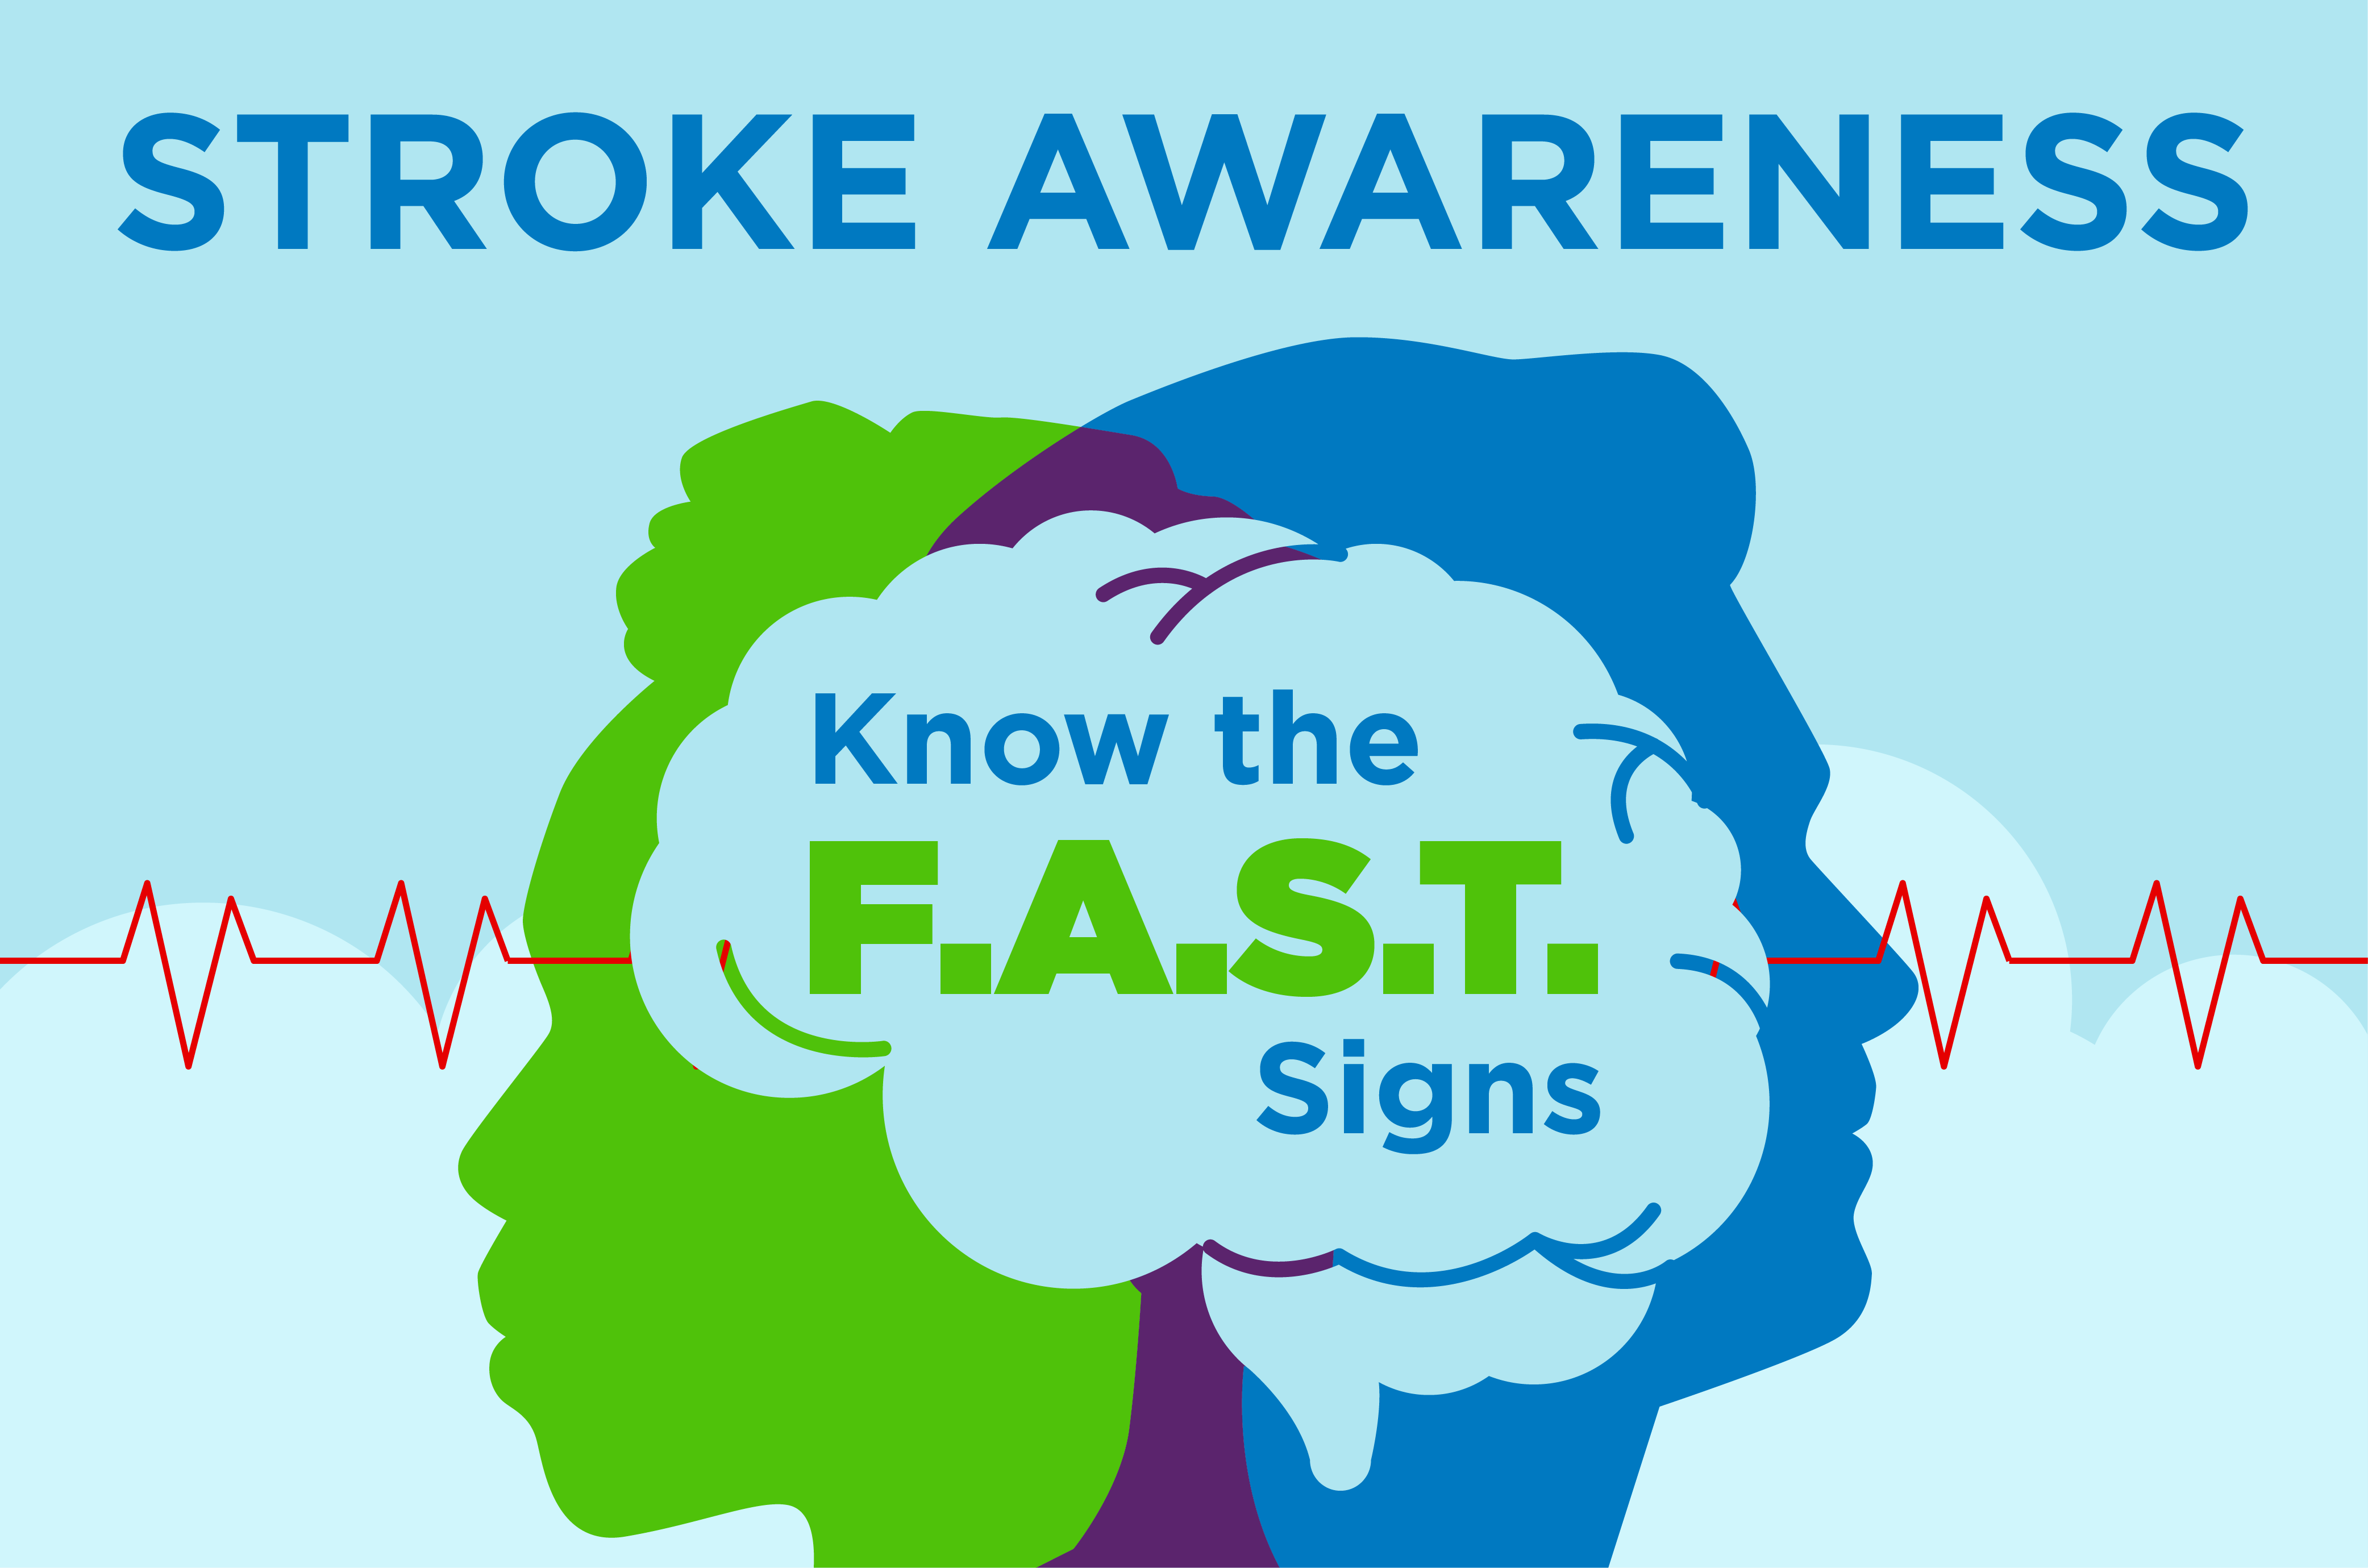 Stroke Awareness: Know the F.A.S.T. Signs